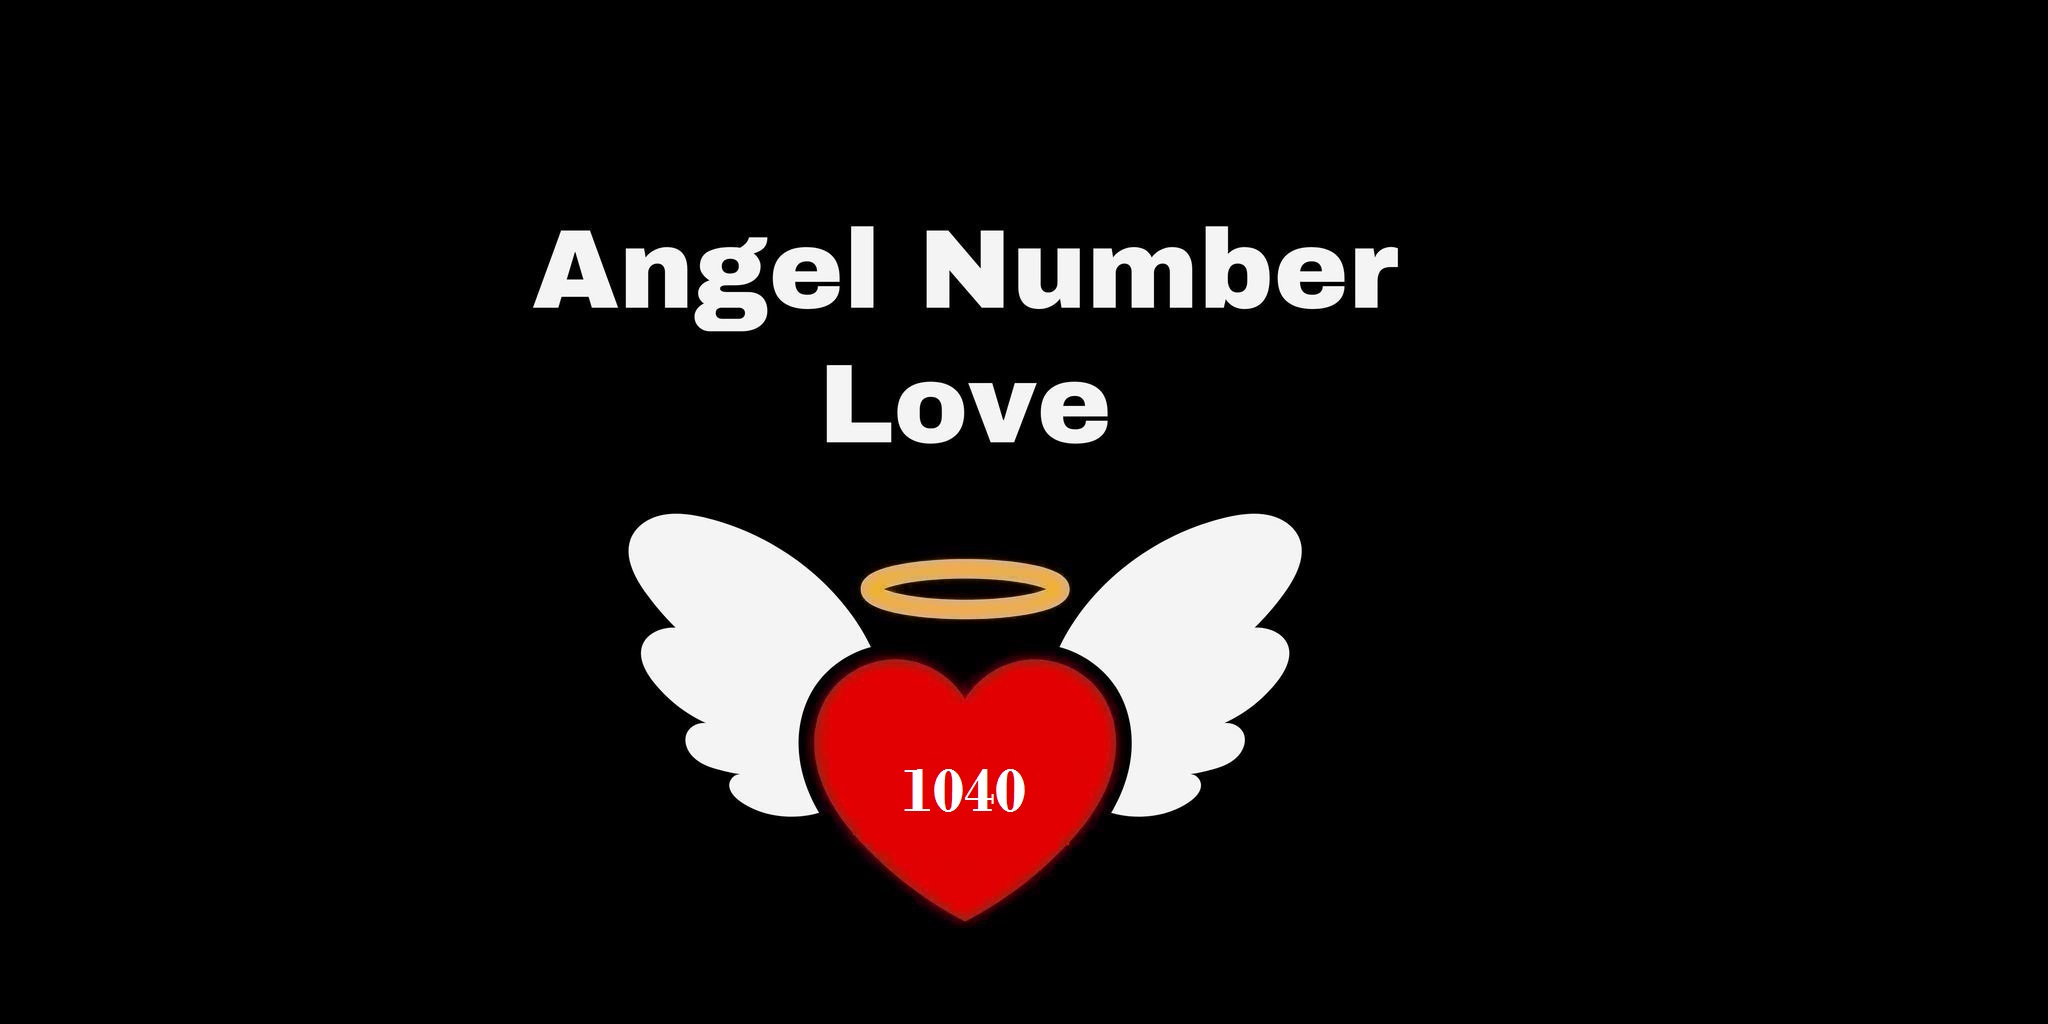 1040 Angel Number Meaning In Love